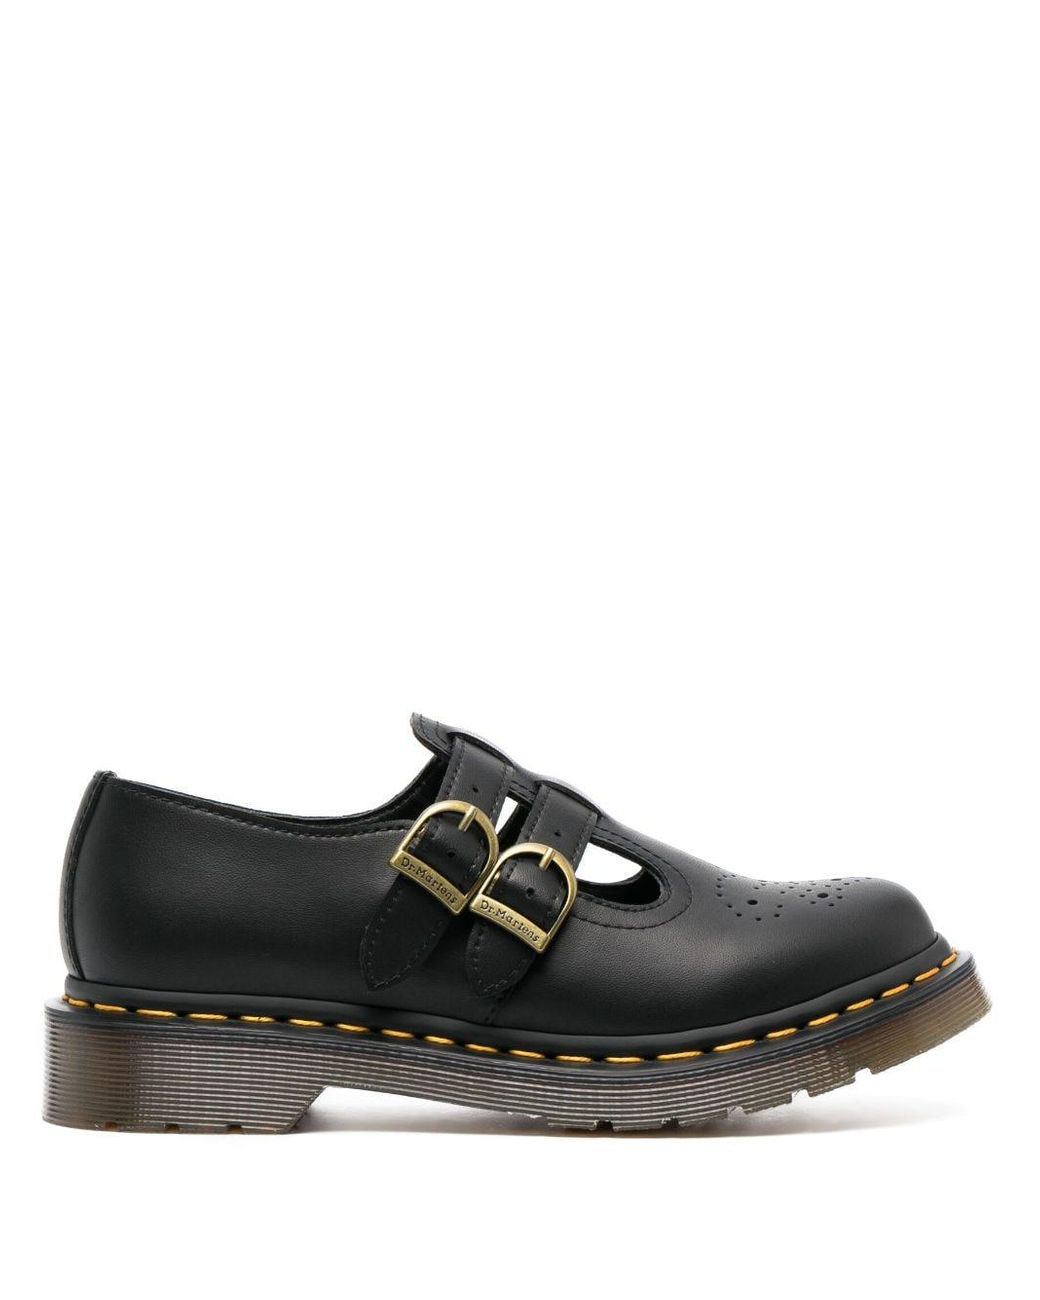 Dr. Martens Mary Jane Double-buckle Oxfords in Black | Lyst